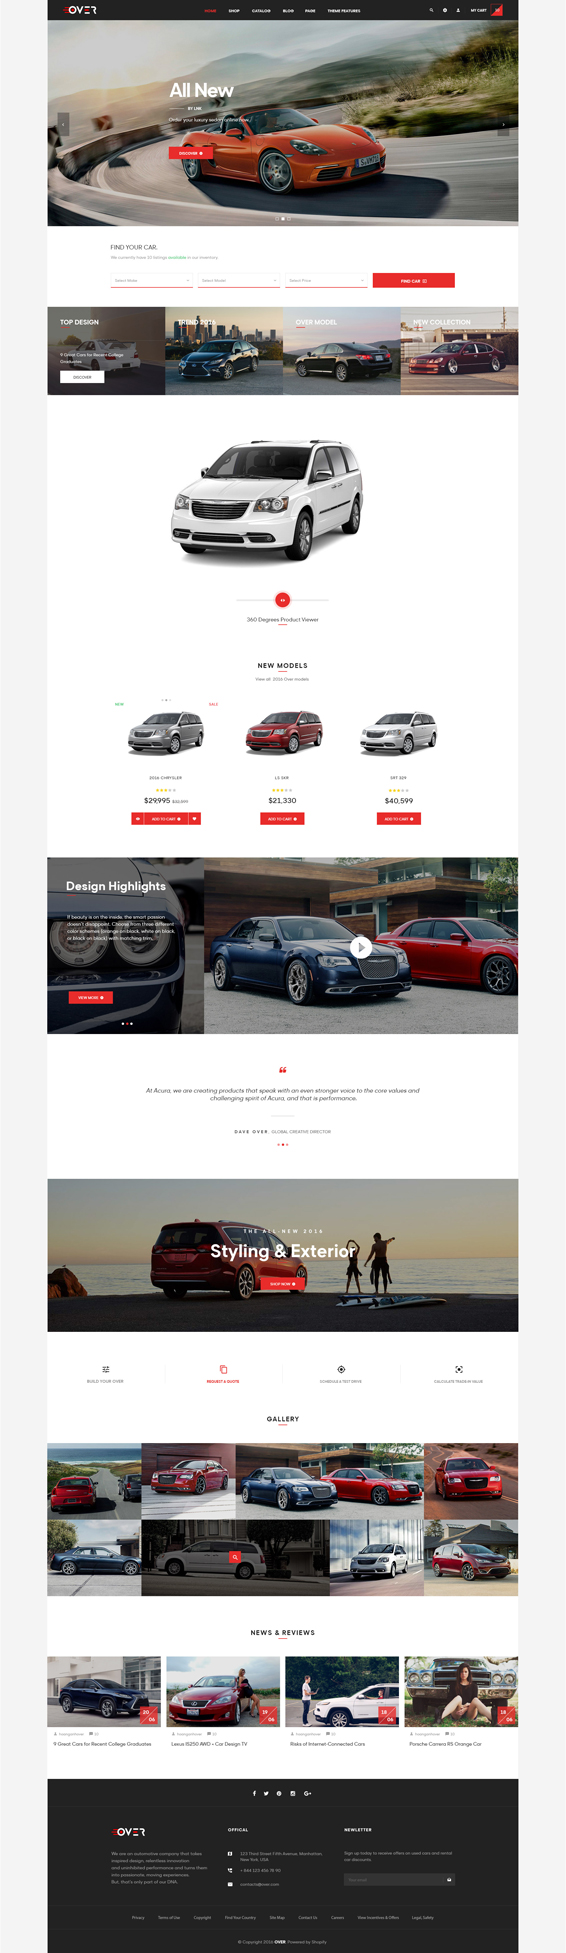 Top Shopify Themes for Automobile - Ap Over Shopify Theme